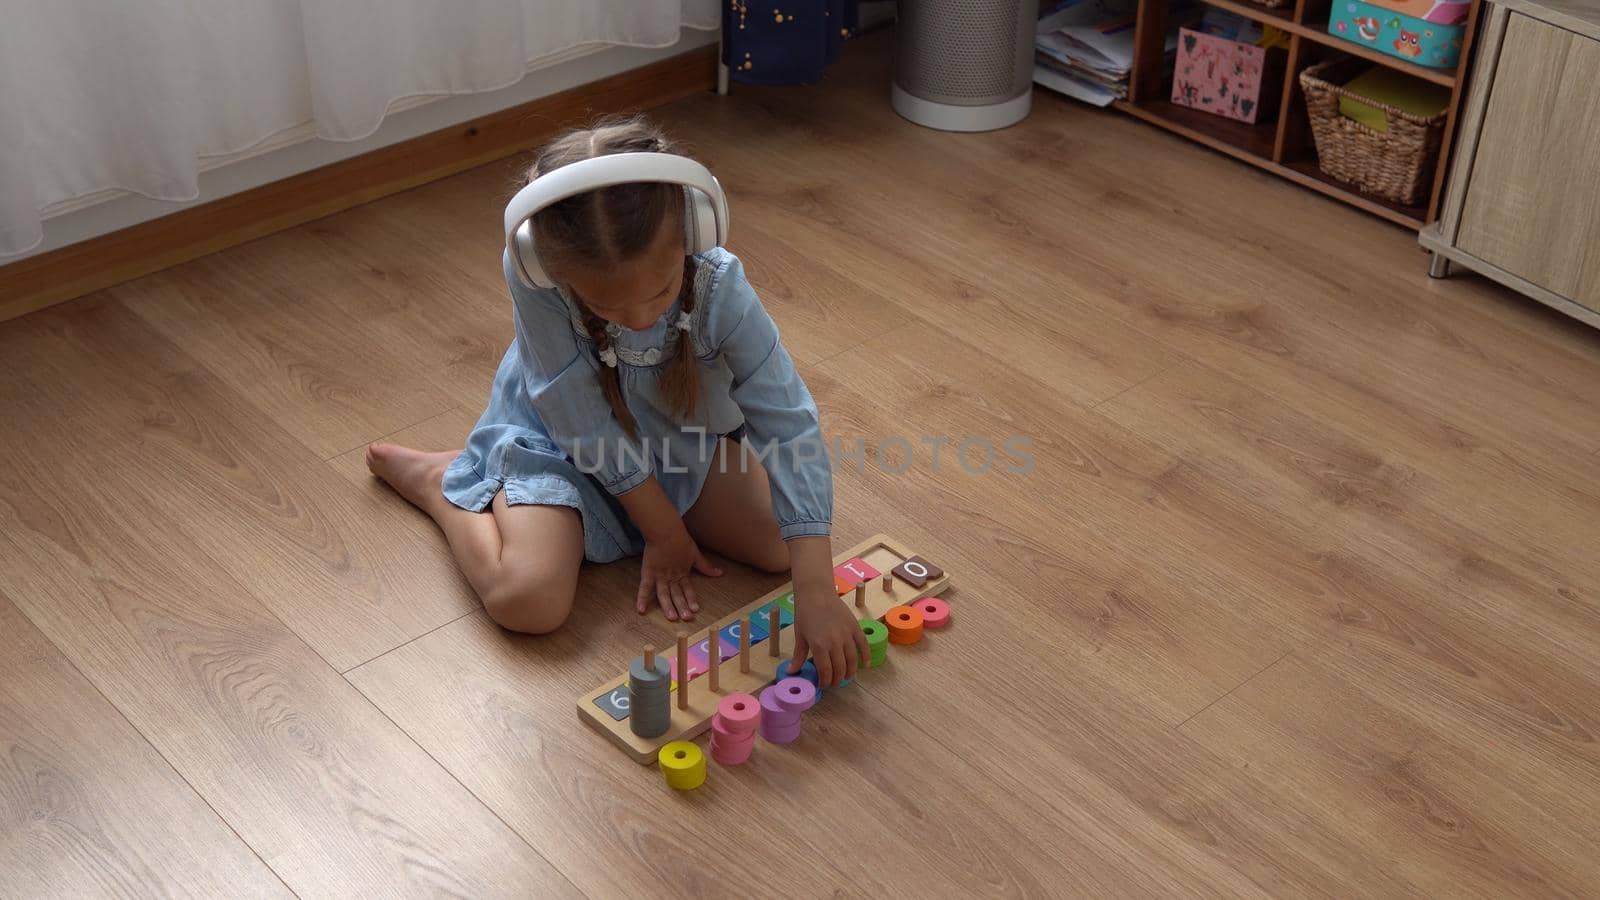 Happy Little Preschool Toothless Girl Playing With Colored Wooden Toy. Kids Learn To Count By Playing Teaches Numbers At Home. Child Listening To Music In Big White Headphones. Childhood, Education.